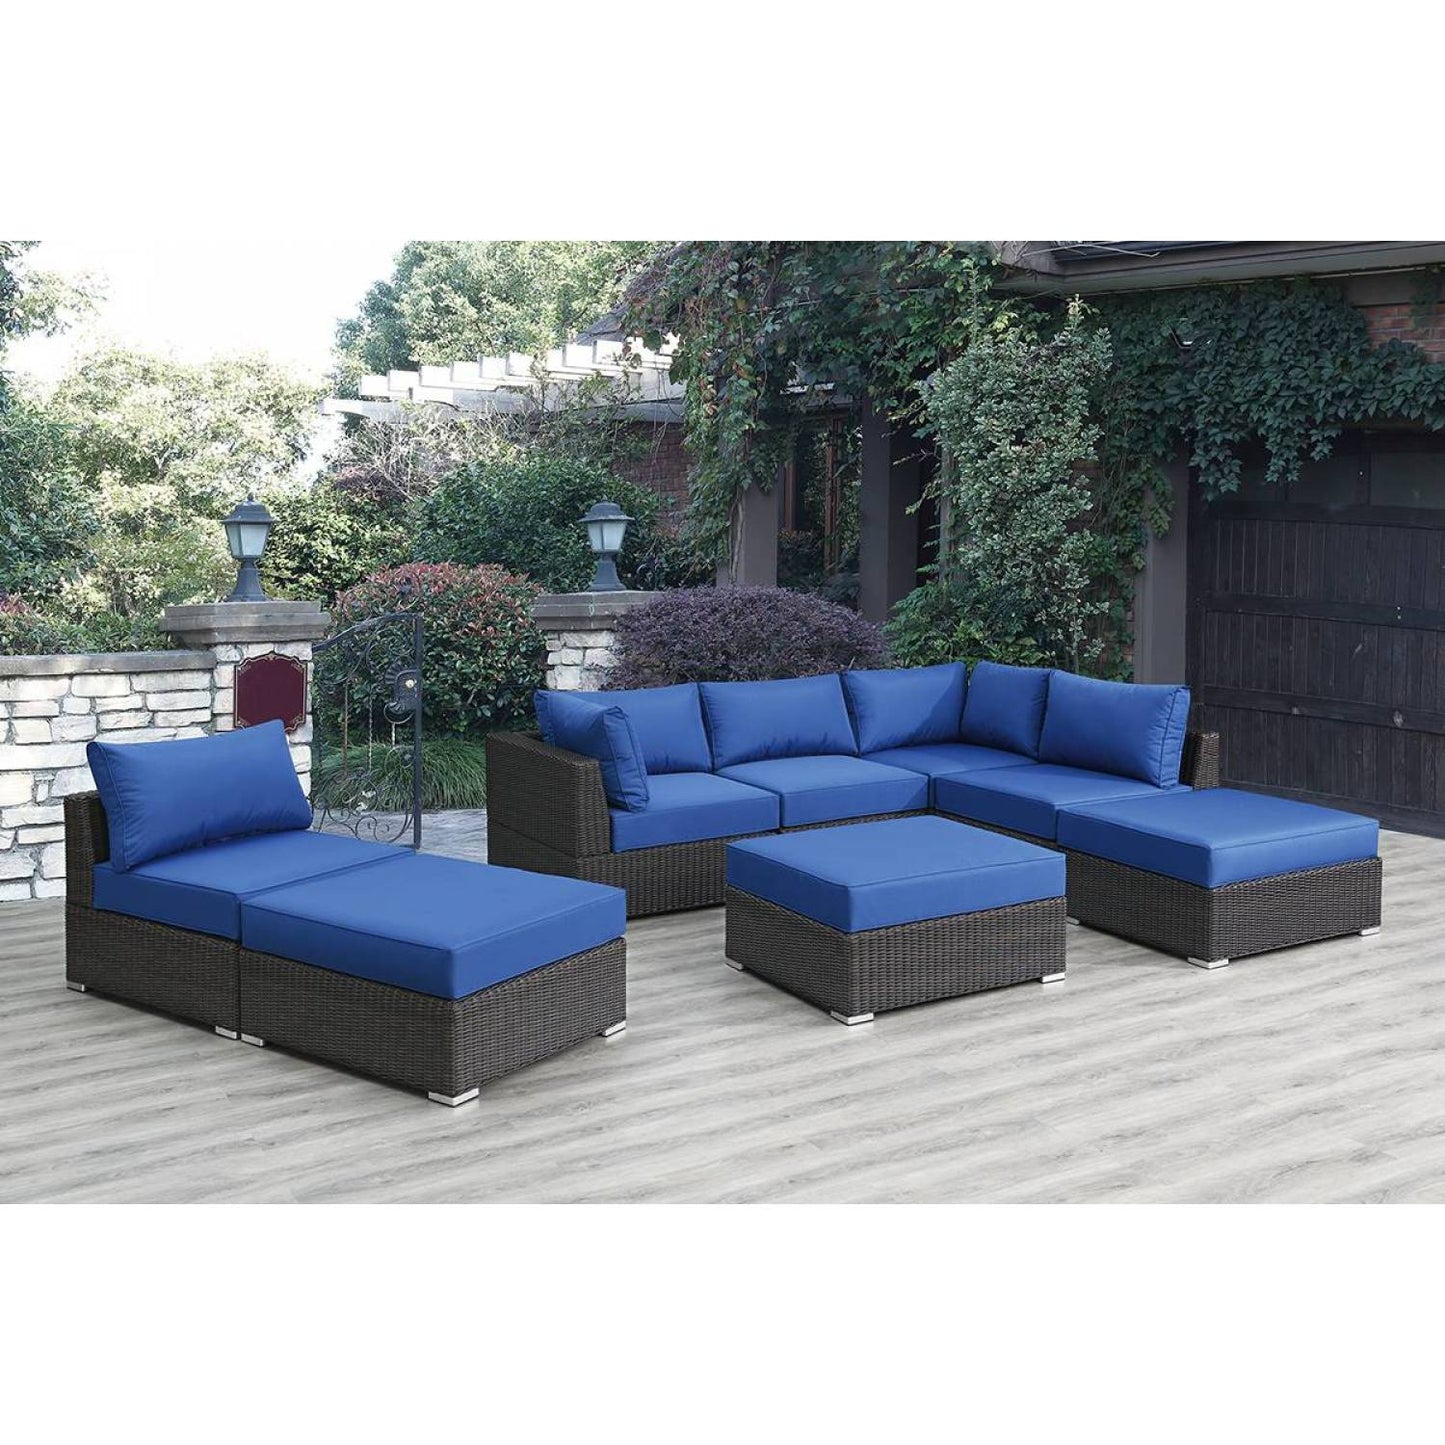 Empire 8pc Outdoor Seating Group with Cushions